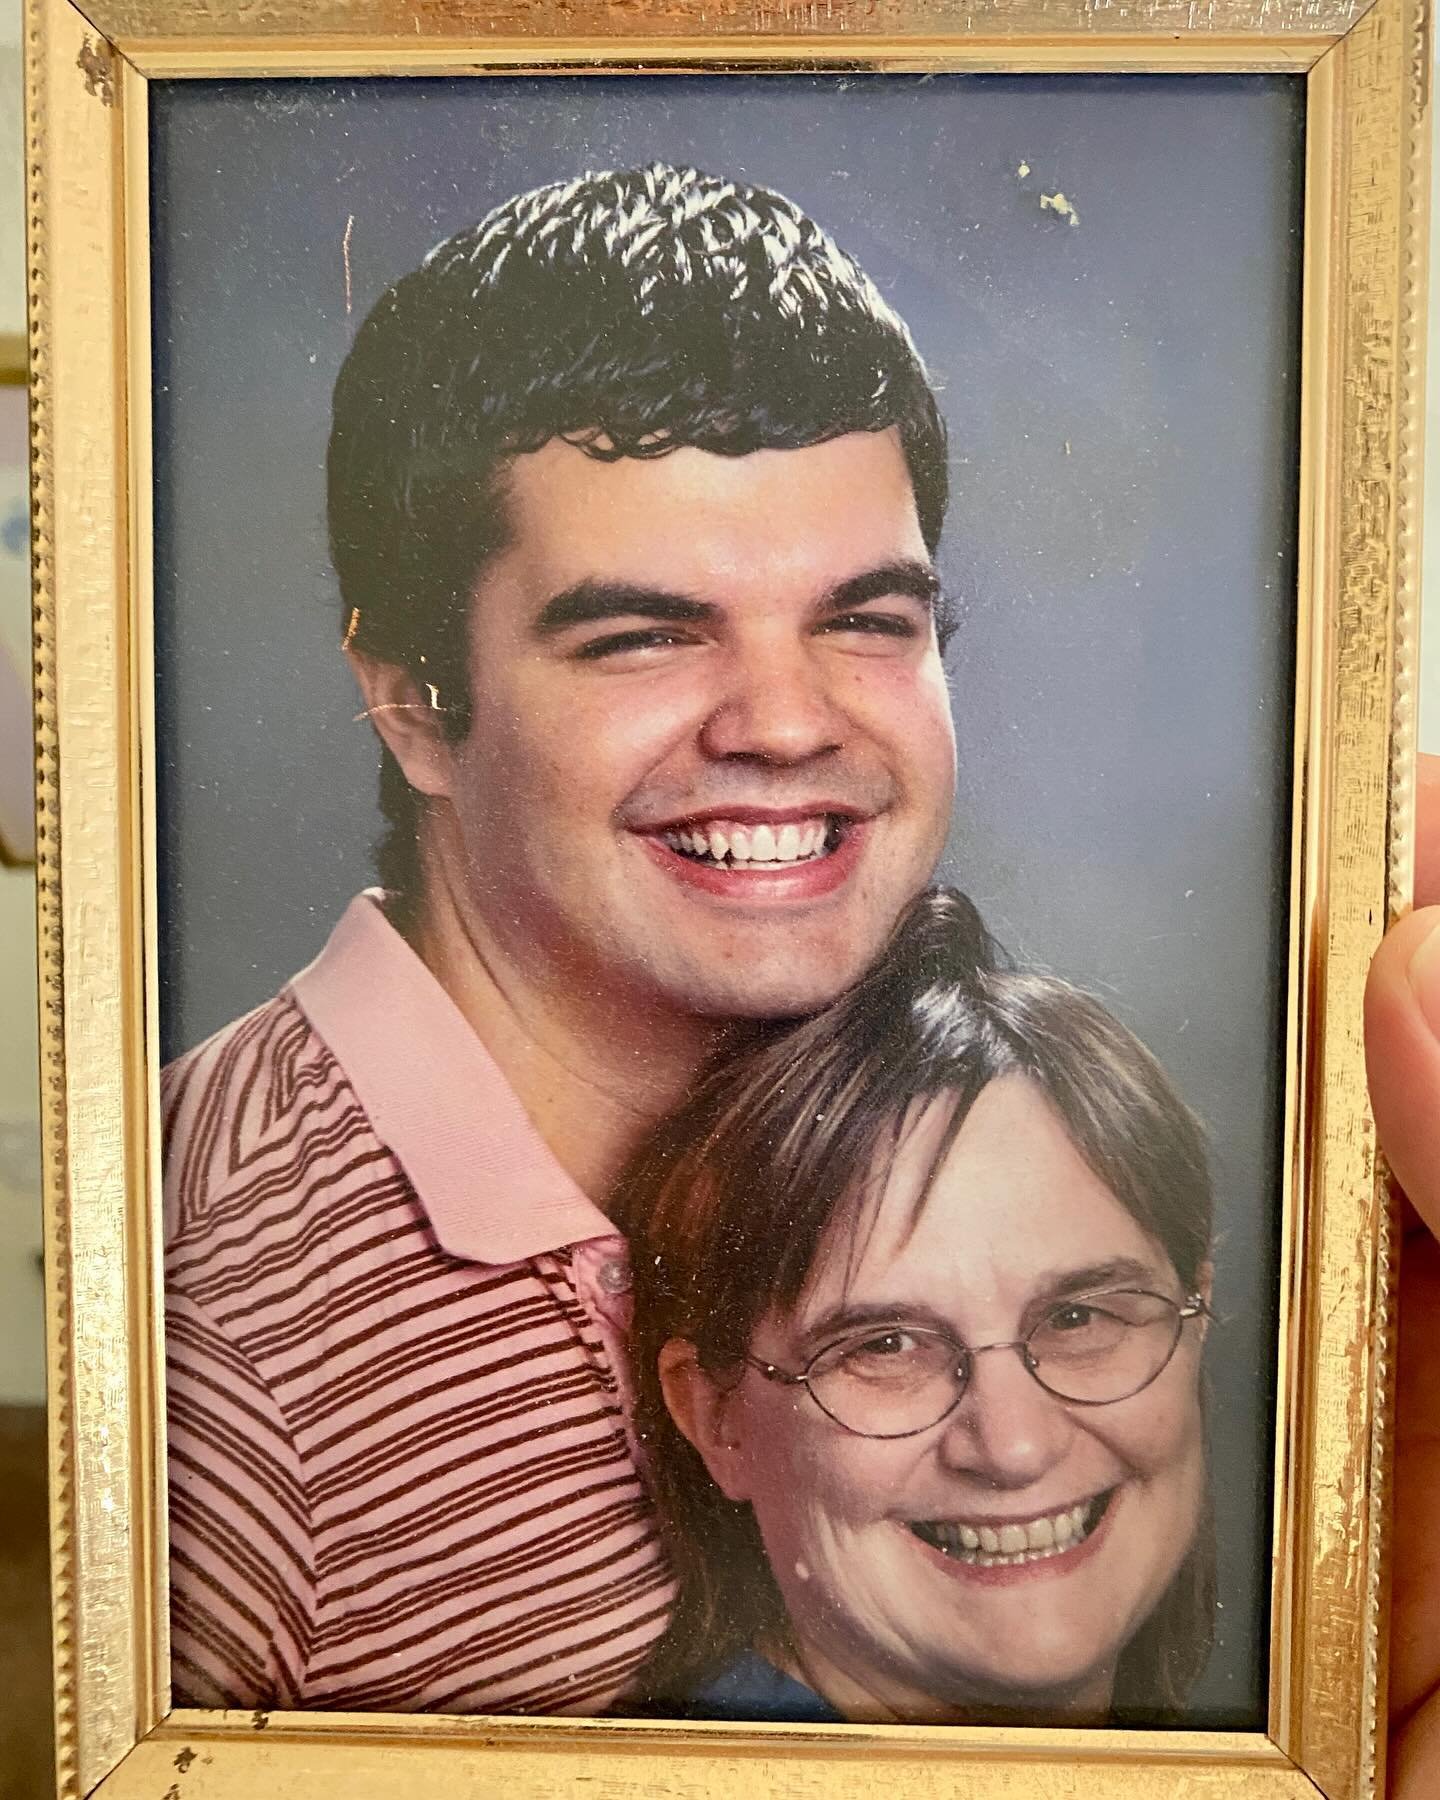 On April 28th, my aunt Pat died.⁣
&nbsp;⁣
Pat lived in Sacramento her entire life. When I was a kid, I would visit every summer and we would get our picture taken at the JCPenney Portrait Studio at the Arden Fair mall. You can literally watch me grow